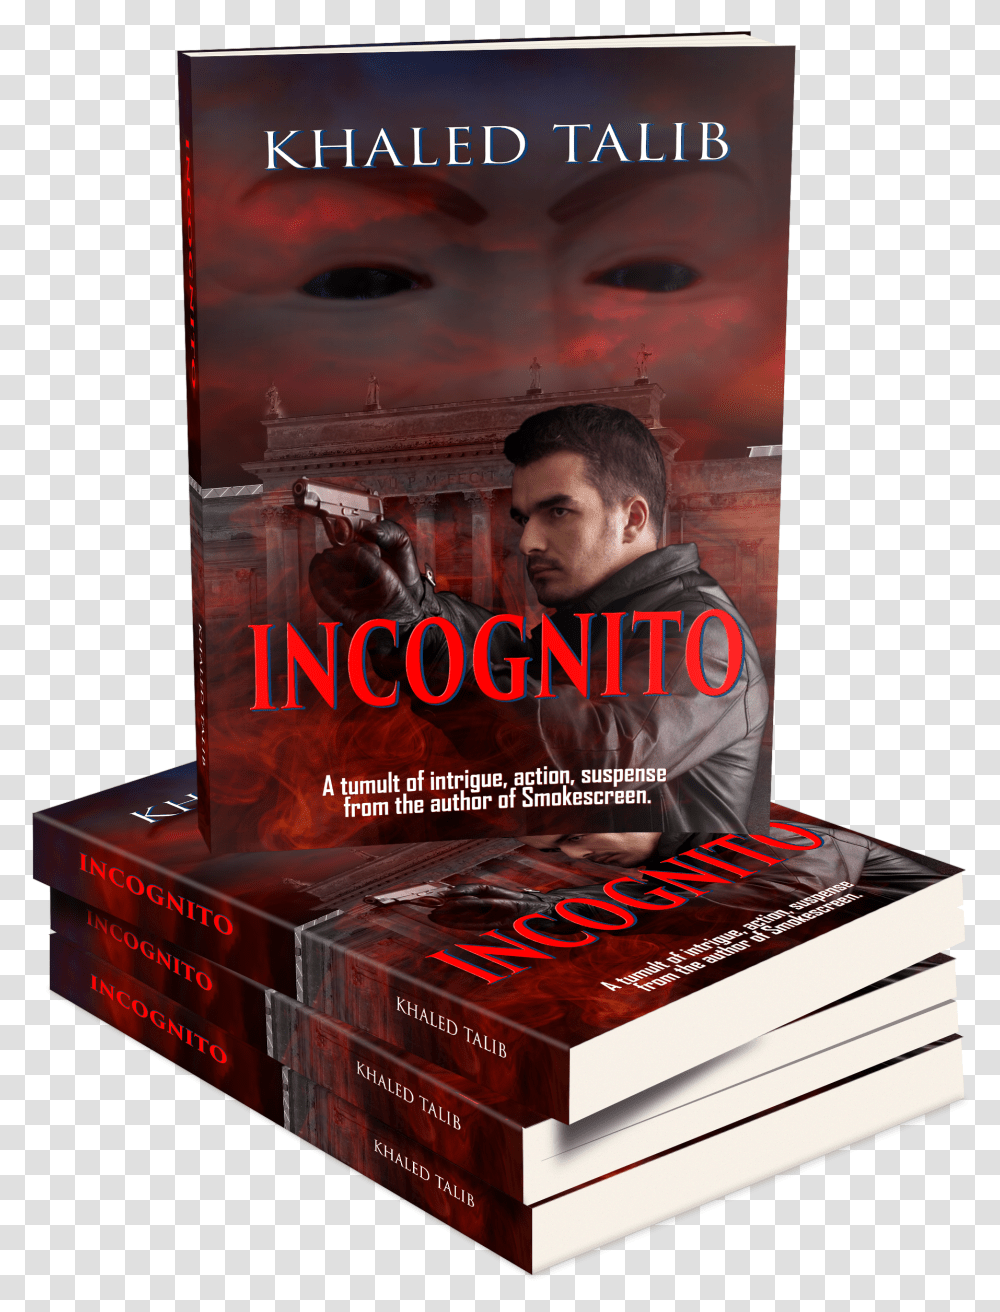 Incognito 3d Book Stack Download Sch Bn Thnh Cng Nguyn Mnh H Transparent Png